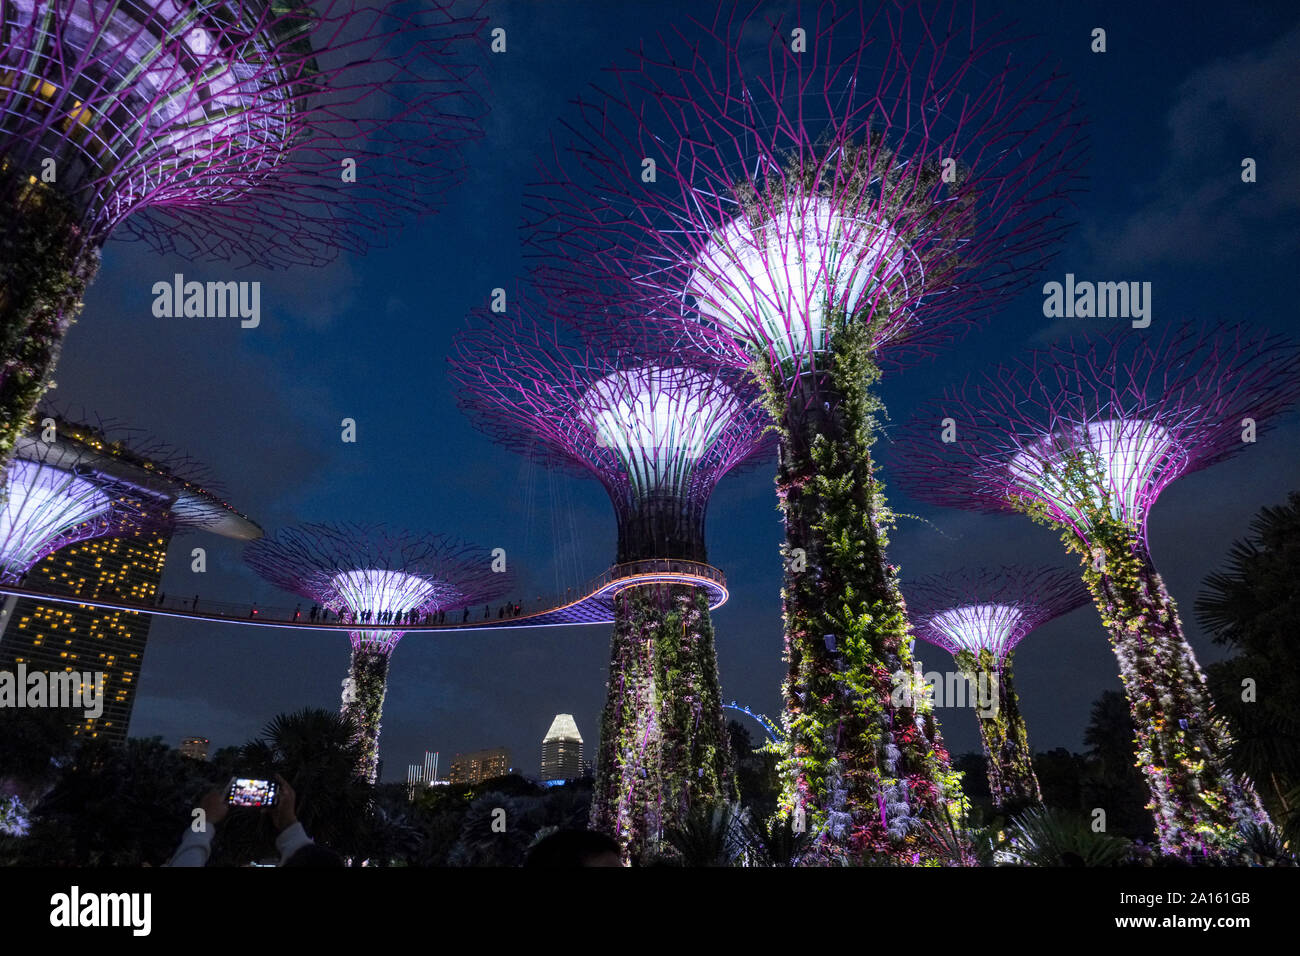 Singapore: night view of supertrees in the Gardens by the Bay (park) Stock Photo